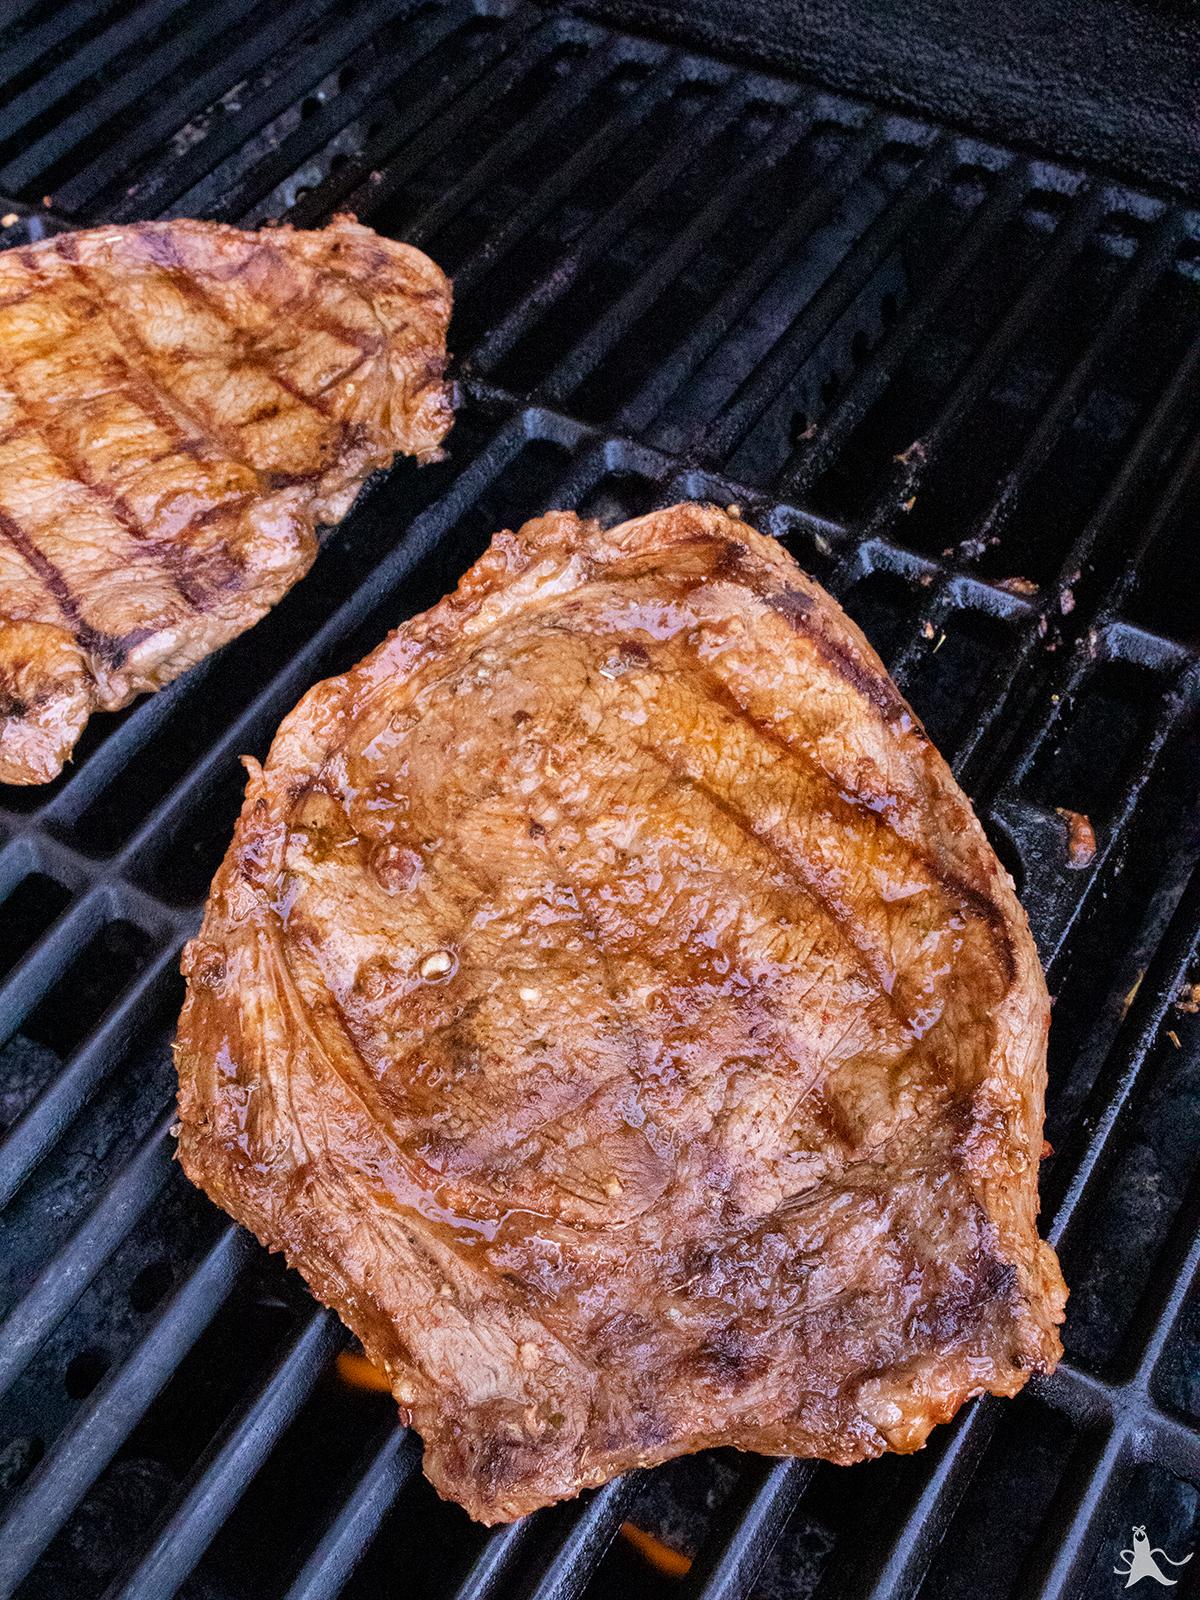 Chipotle marinated steak on the grill